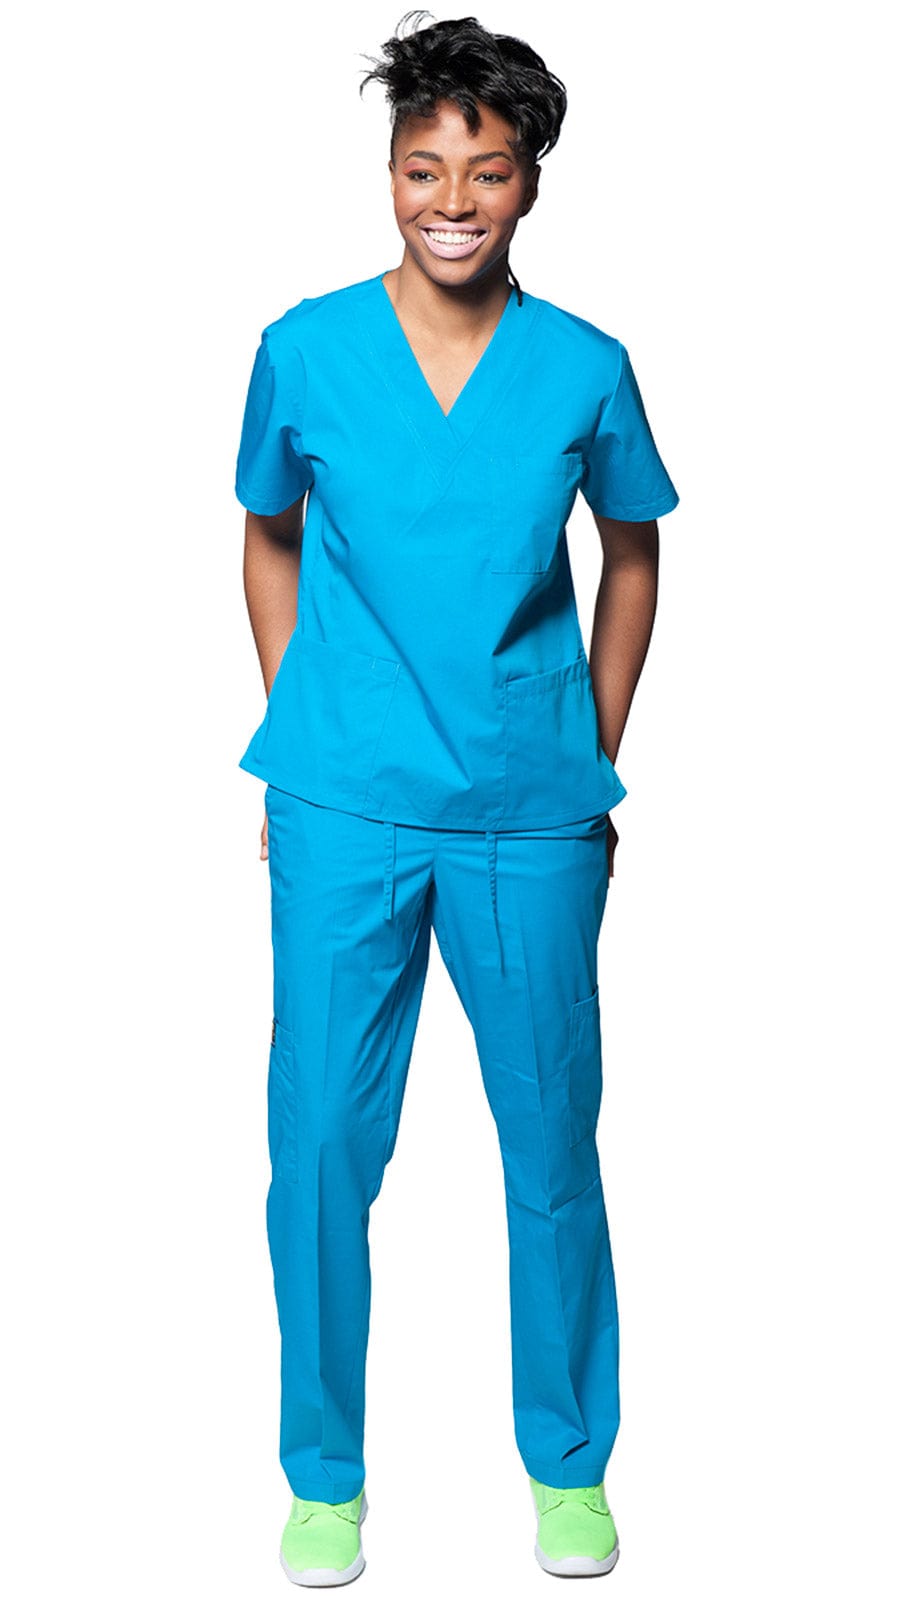 The Latest Trends In Fashion Scrubs For Nurses